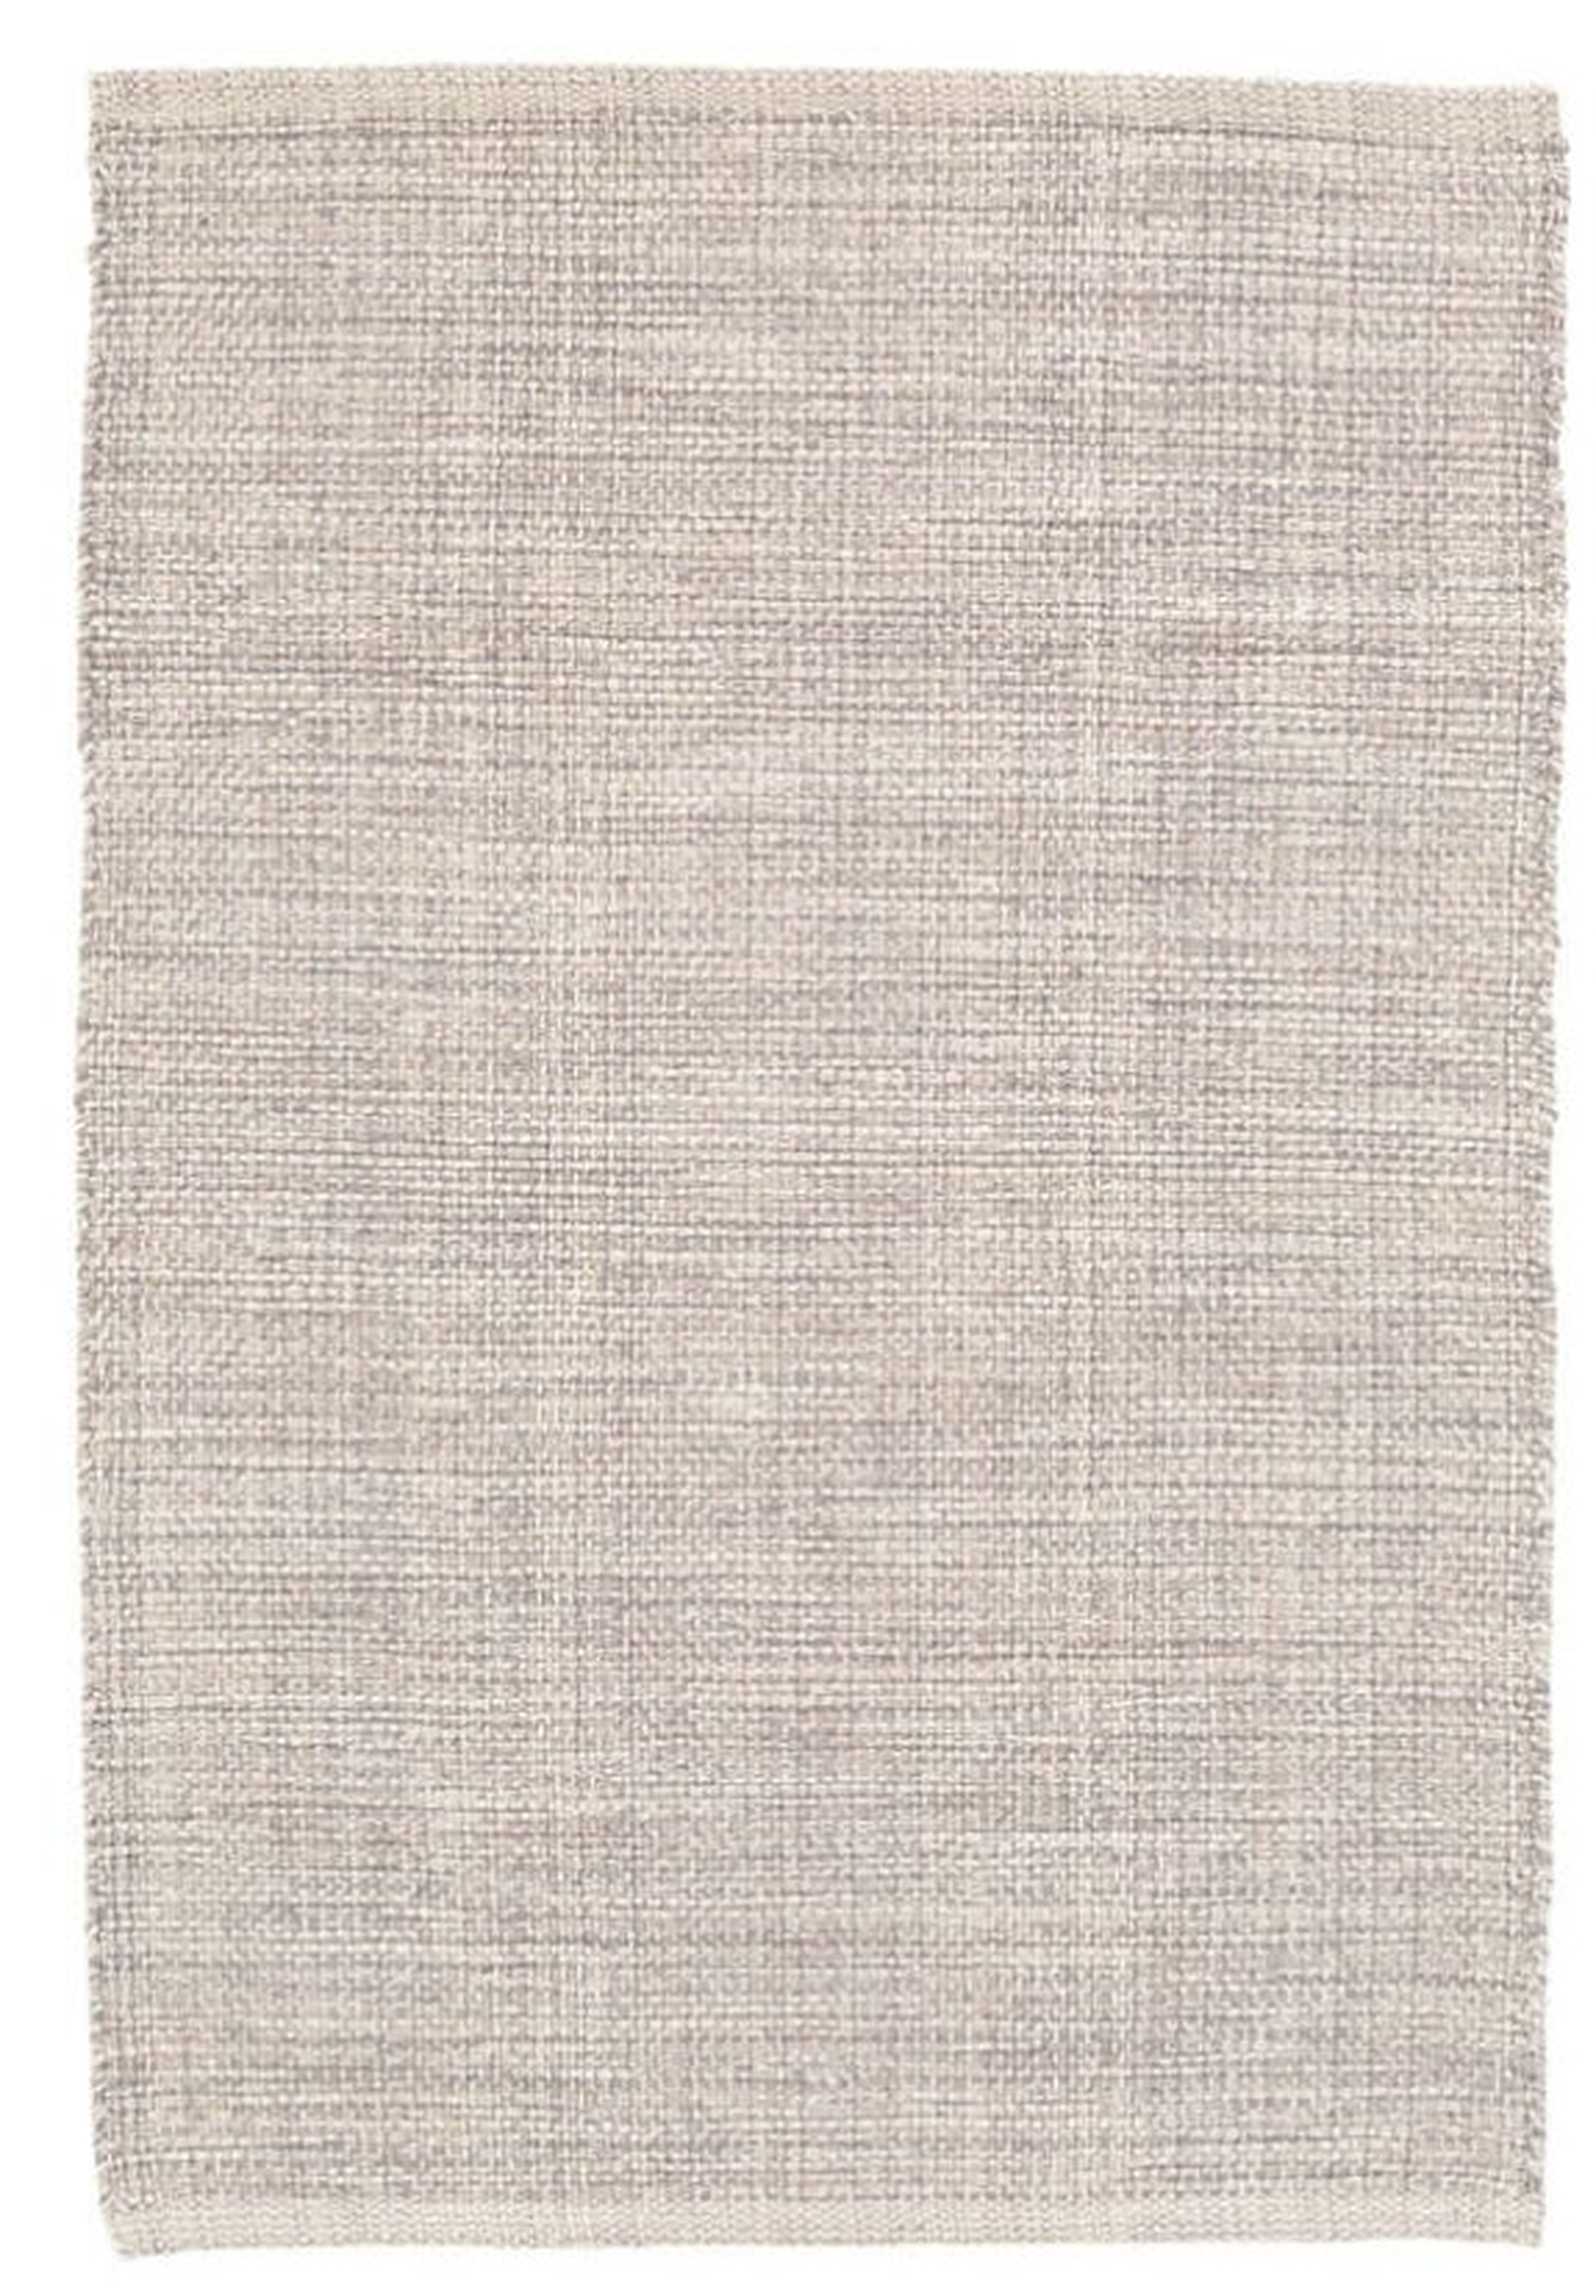 MARLED GREY WOVEN COTTON RUG - 9x12 - Dash and Albert